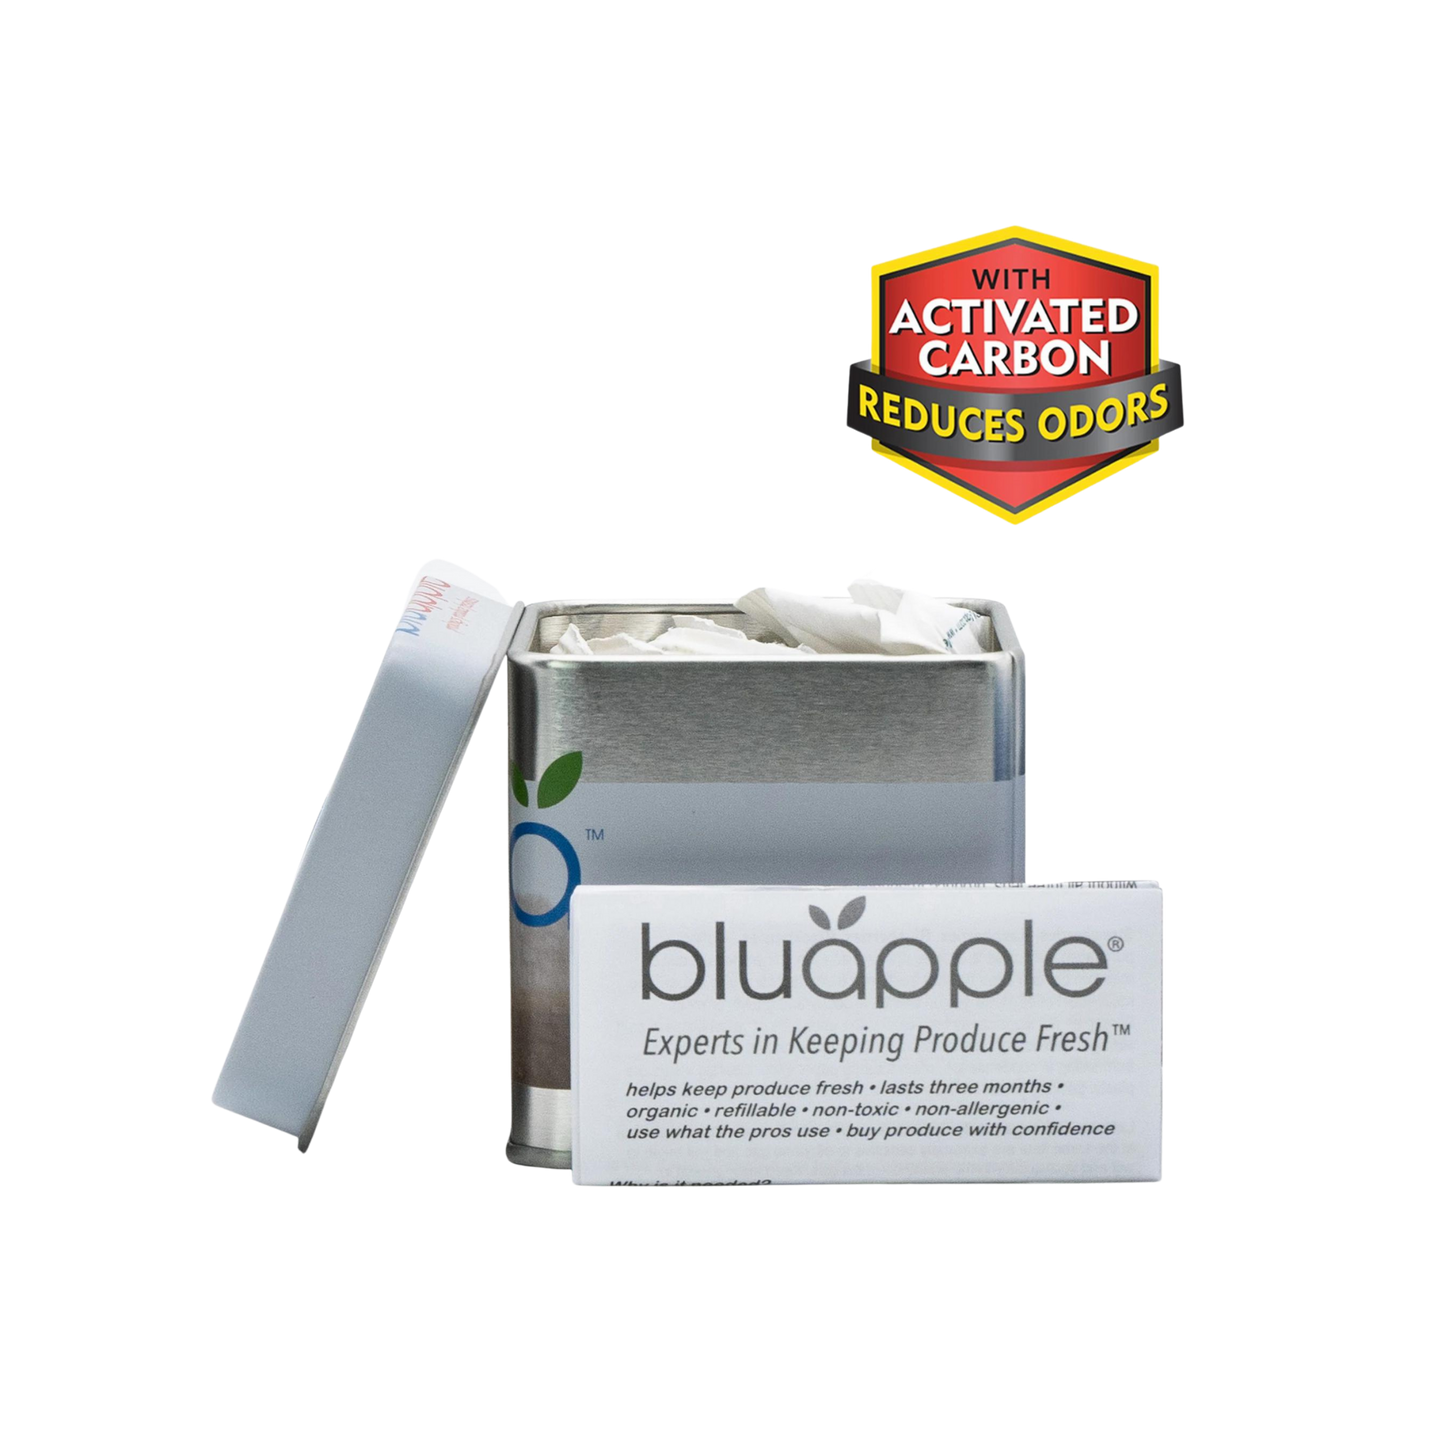 Bluapple® One-Year Refill Kit with Activated Carbon (Eco-Friendly)